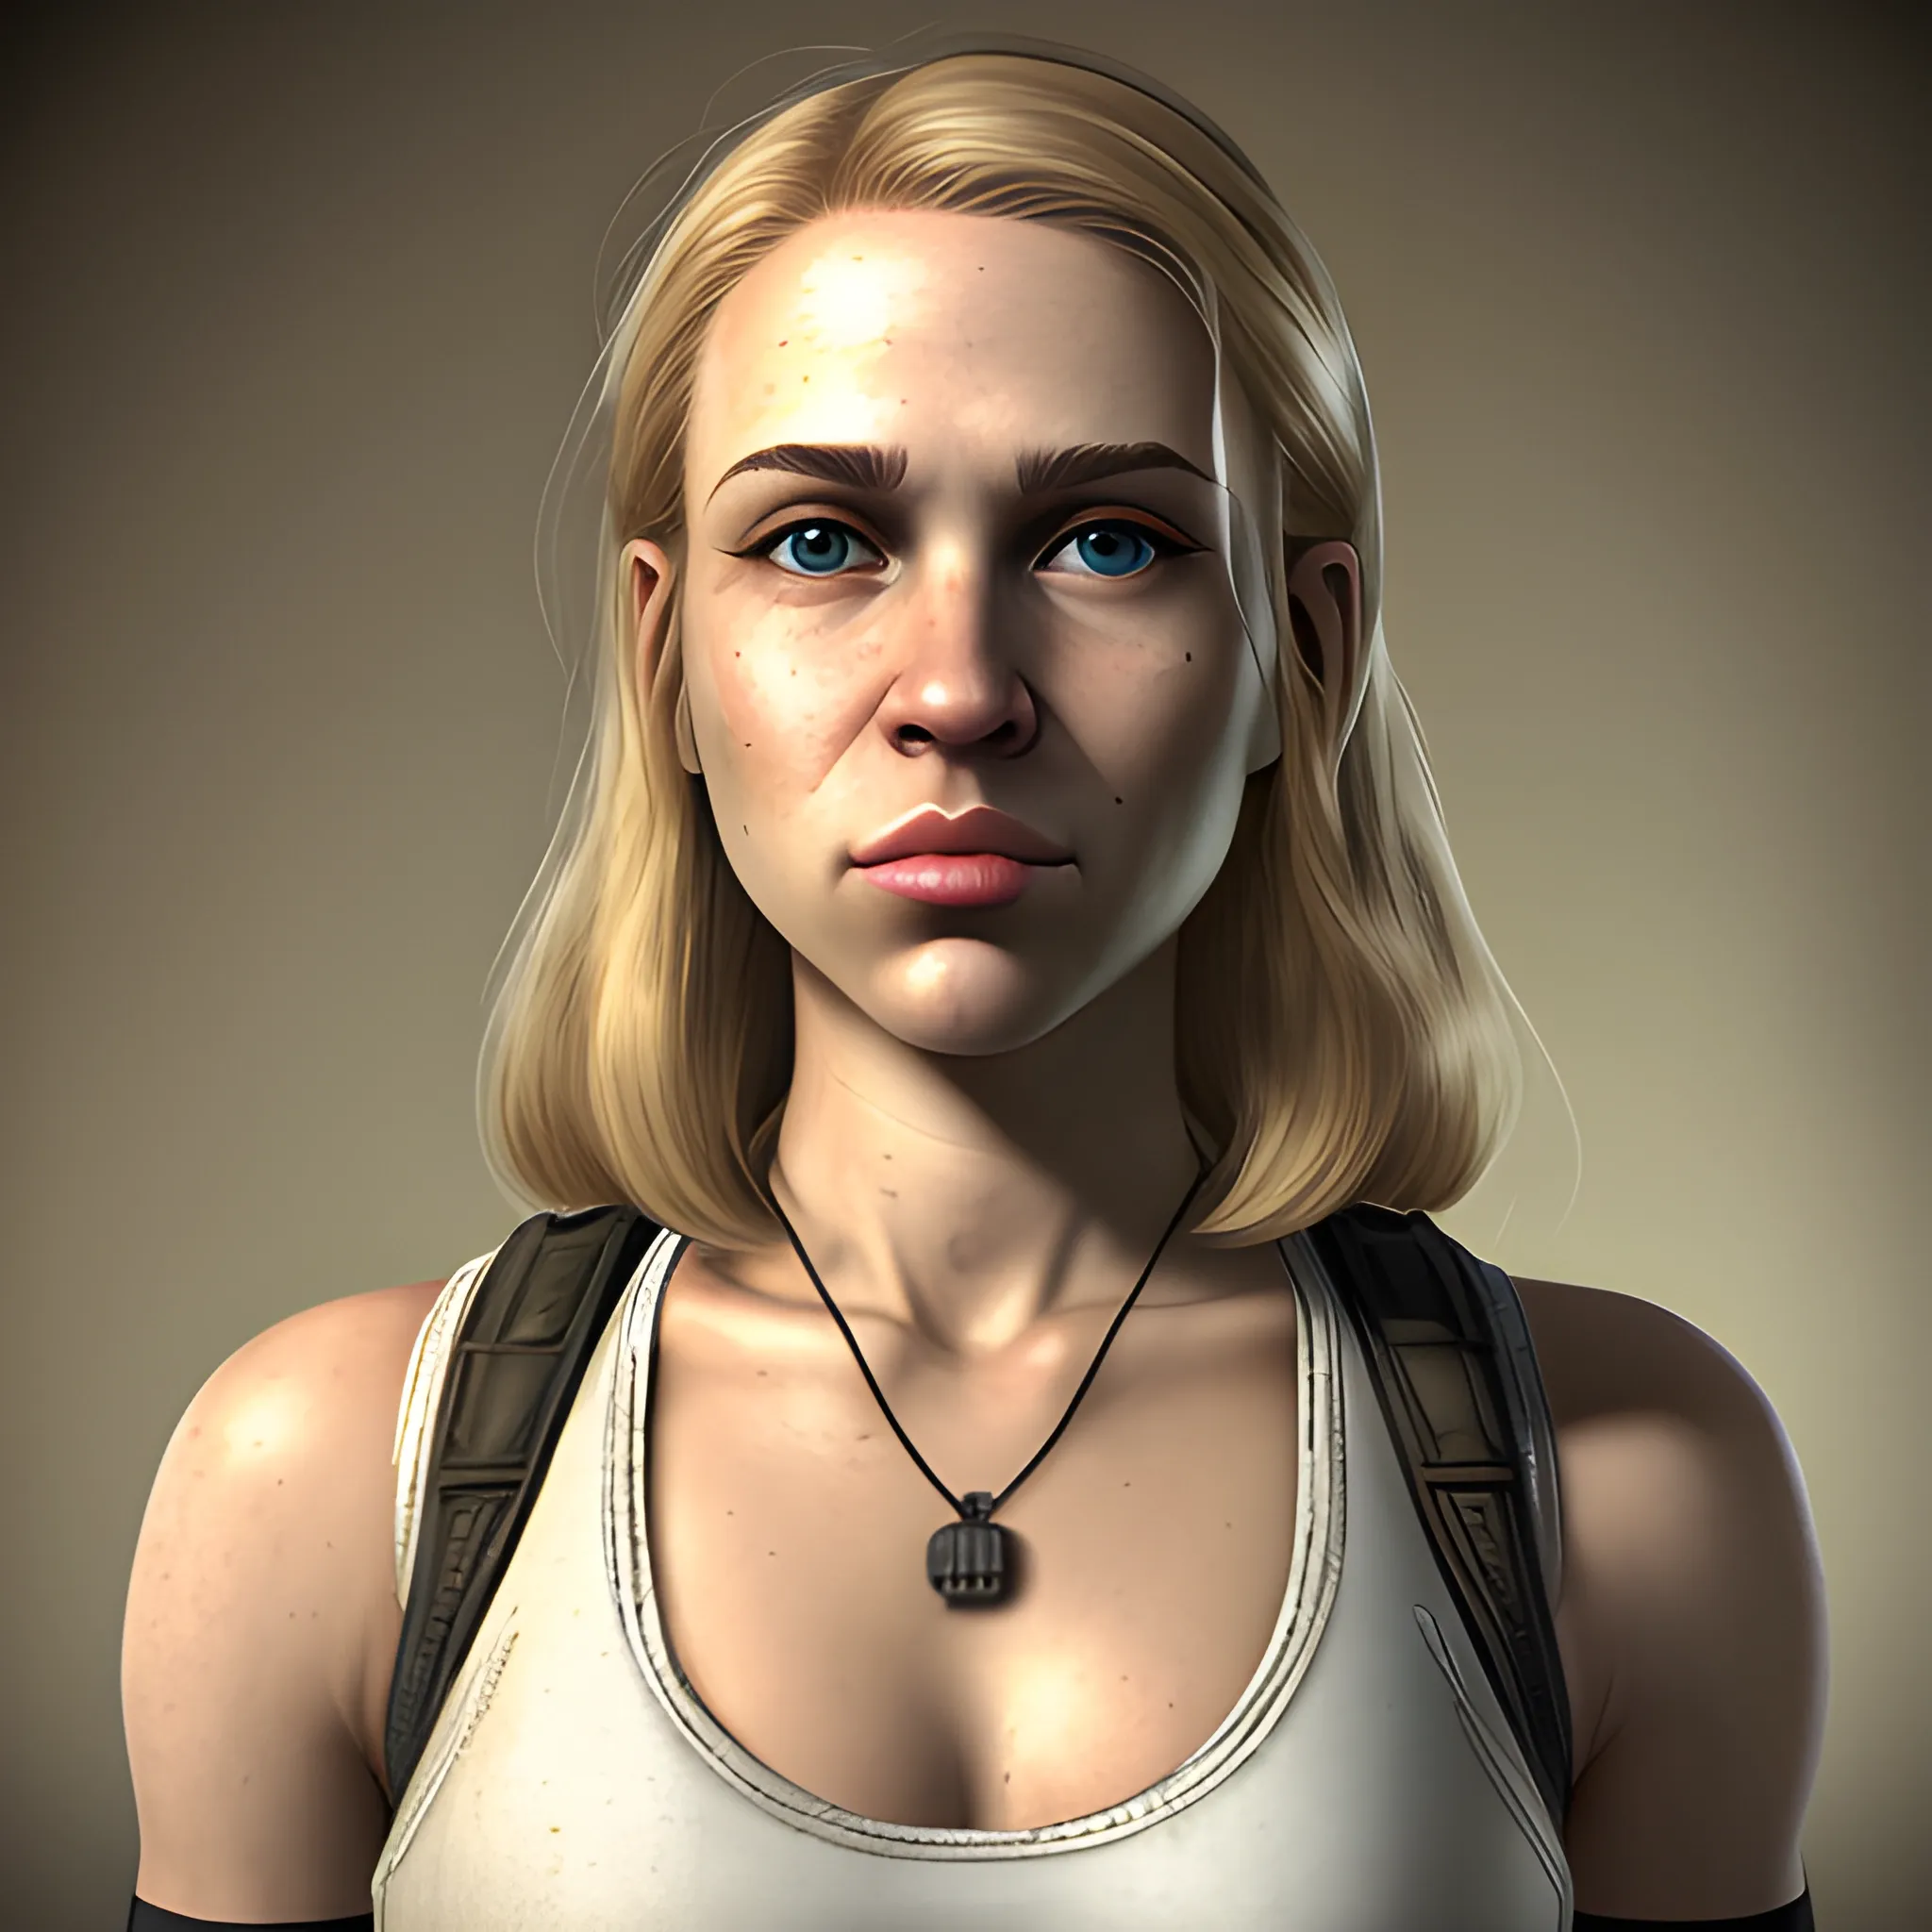 In the style of fallout 1, (masterpiece), (portrait photography), (portrait of a Caucasian female), no makeup, flat chested, white sports bra, dogtags, long hair, blond hair, brown eyes, full lips, round face, round nose, plump cheeks, black Bulletproof vest